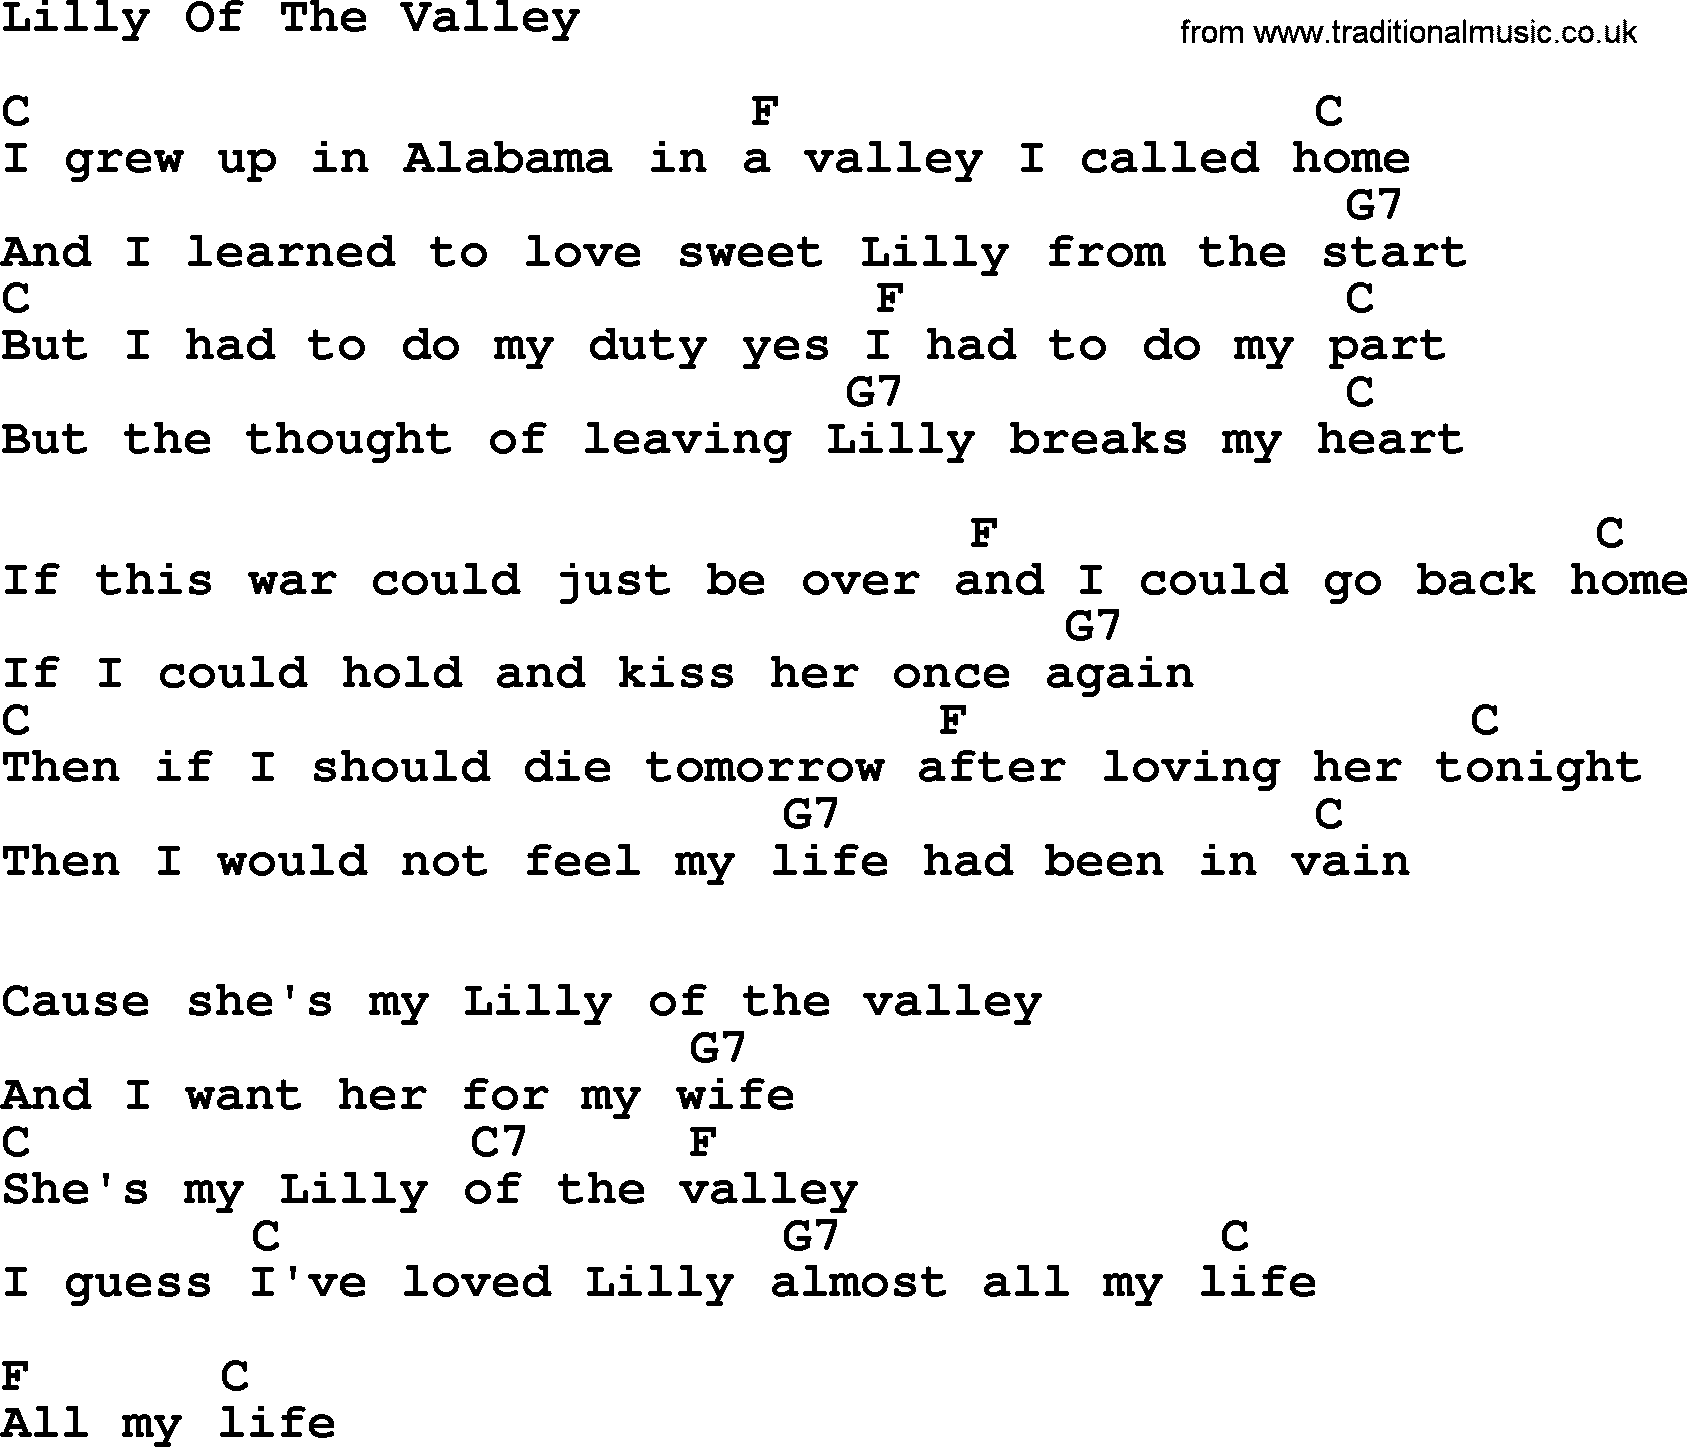 Marty Robbins song: Lilly Of The Valley, lyrics and chords